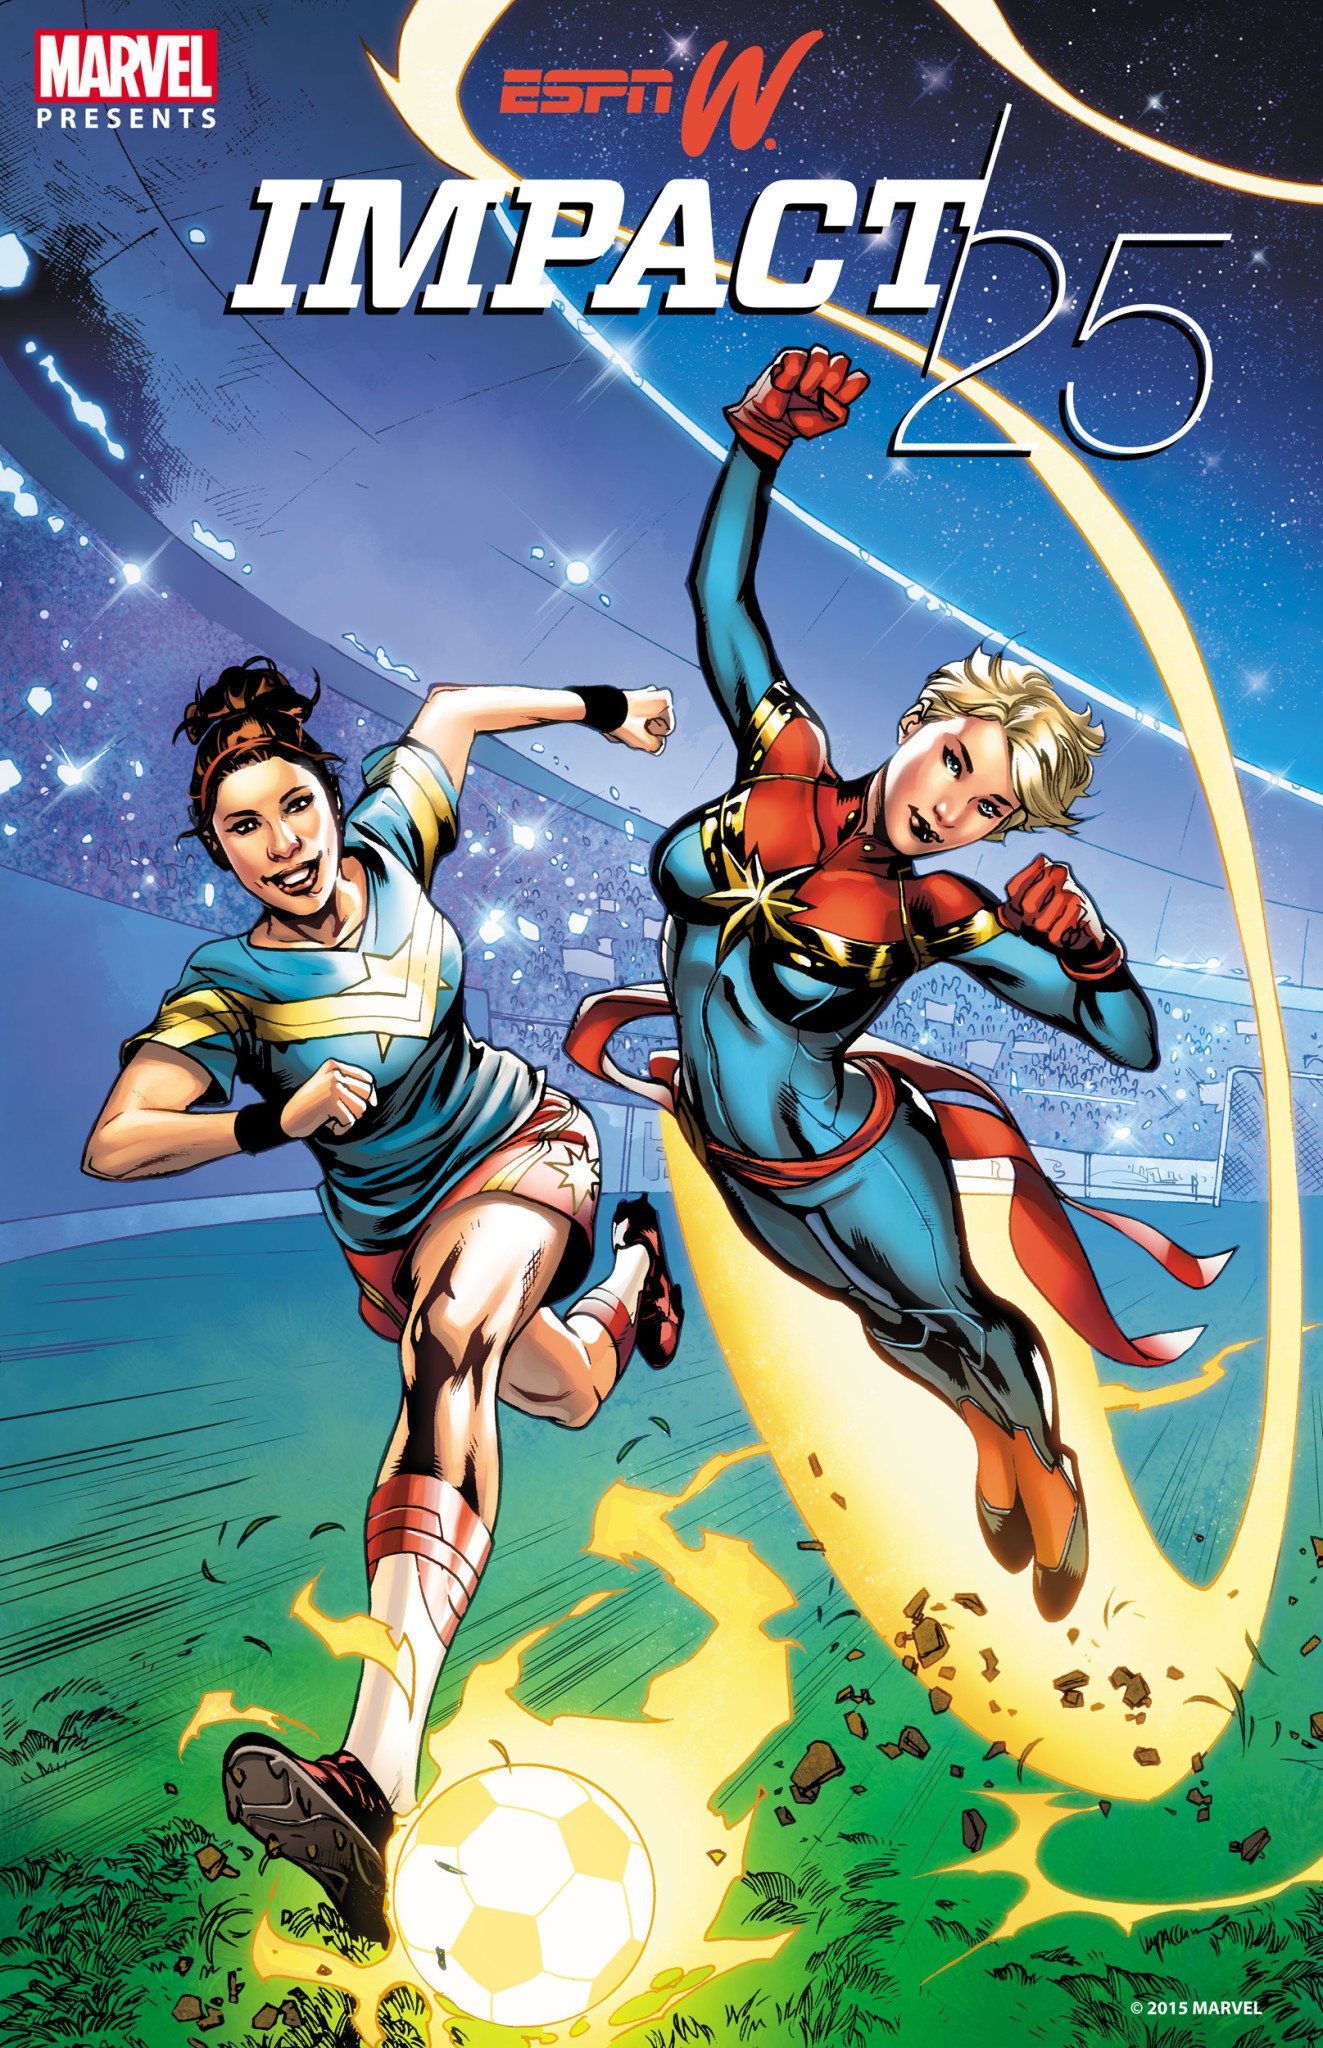 espnW Teams with Marvel Comics for “Super” Take on 2015 “IMPACT25” List